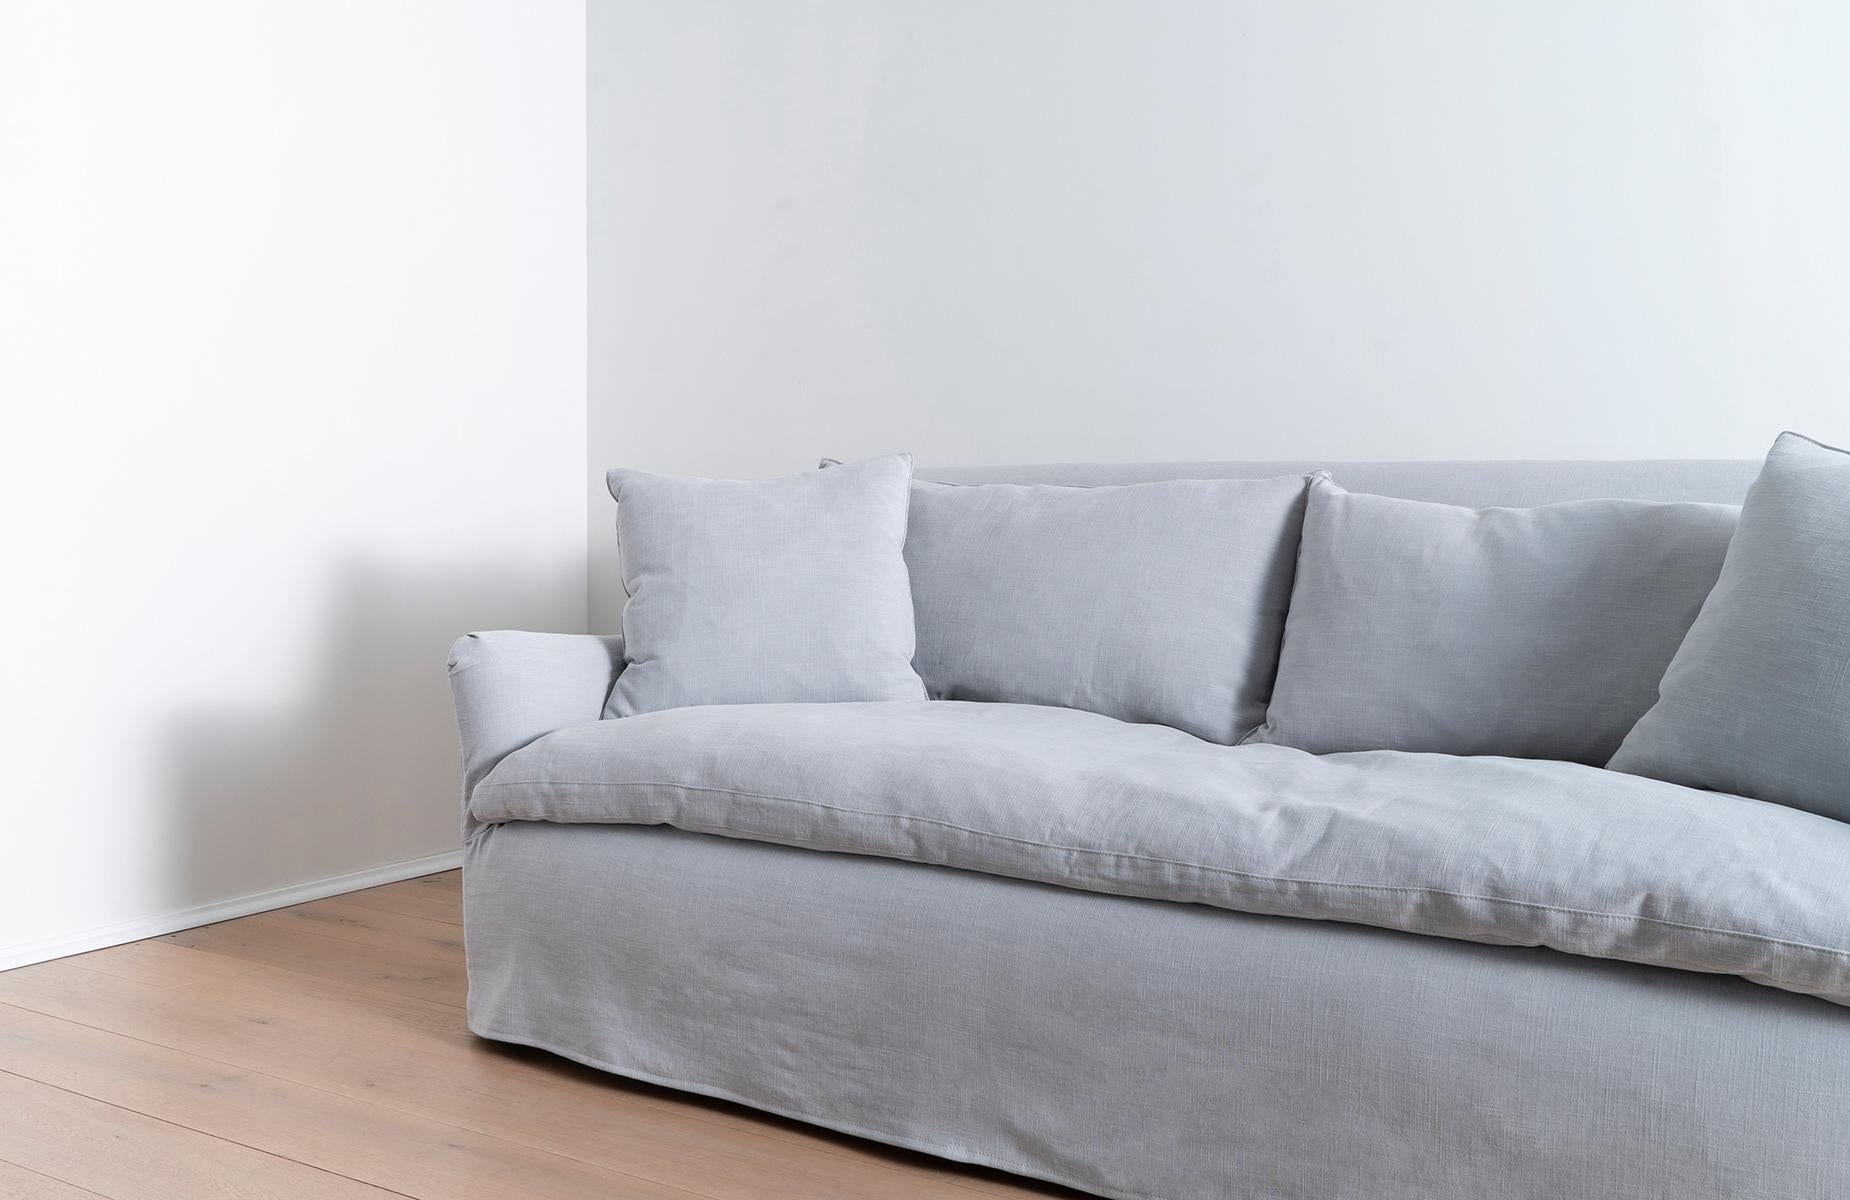 The Cisco Brothers slipcovered Hazel Sofa in Molino Dove Grey organic cotton combines comfort, quality craftsmanship, and durable, eco-friendly manufacturing to result in a stylish organic modern sofa for your living room. Cisco is considered one of